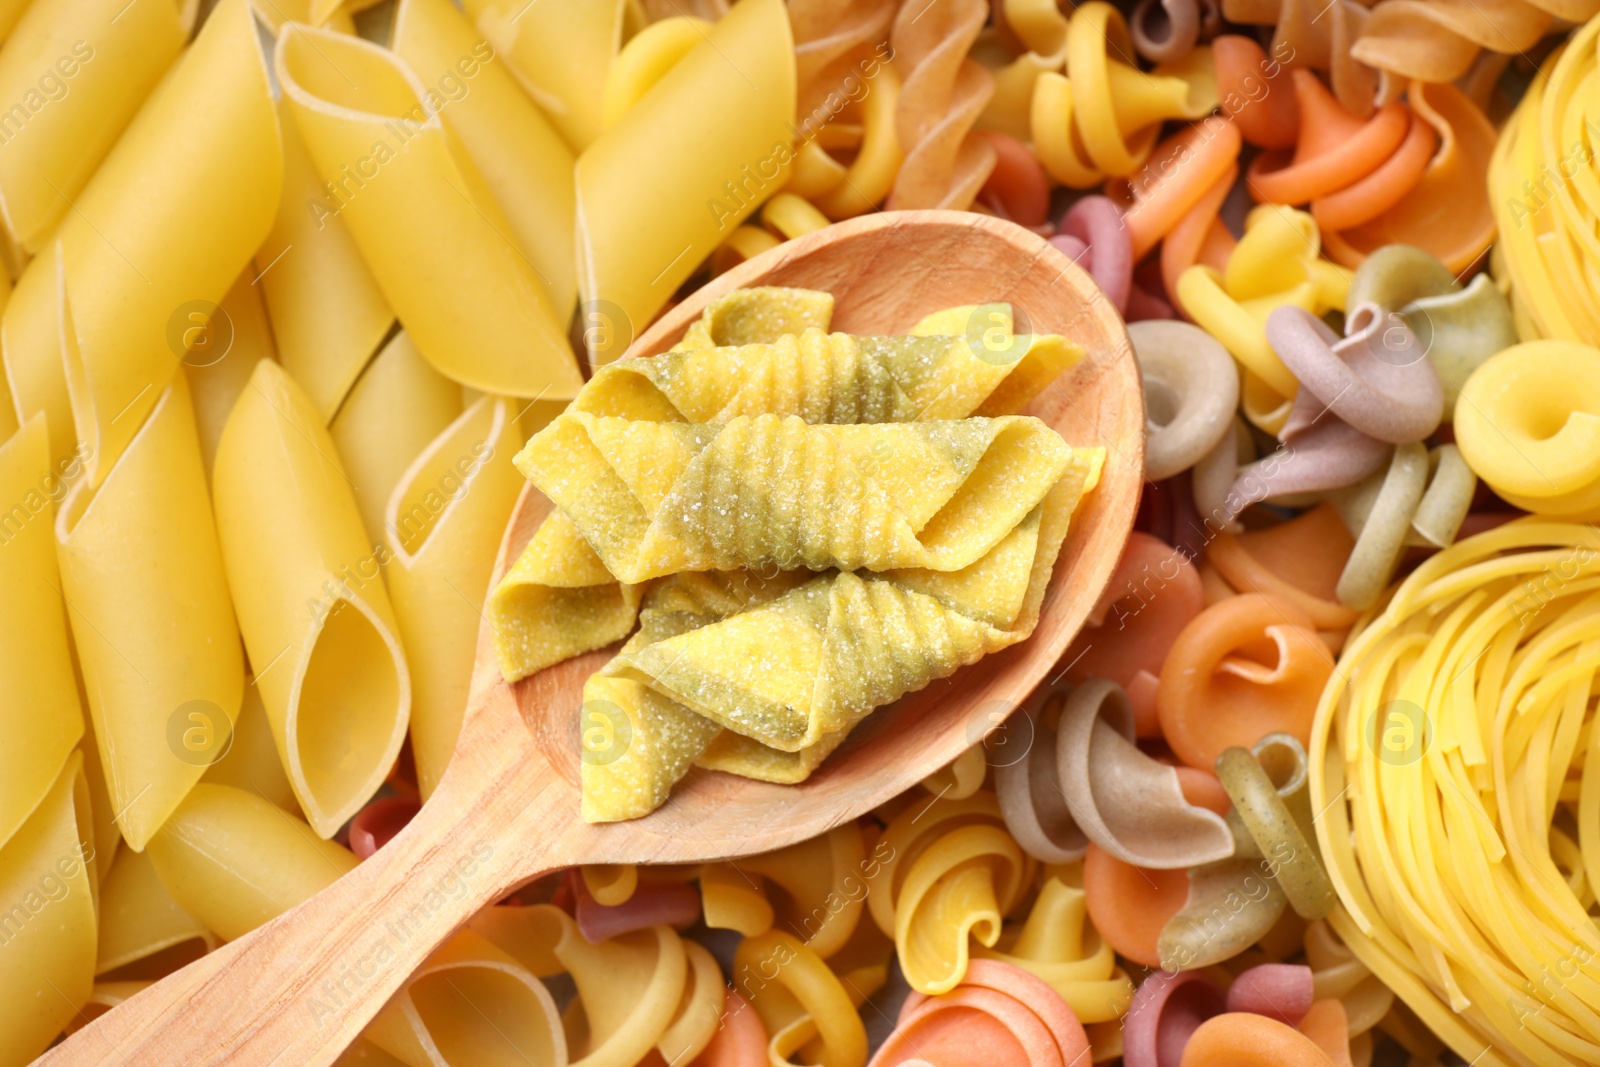 Photo of Wooden spoon and different types of pasta as background, top view